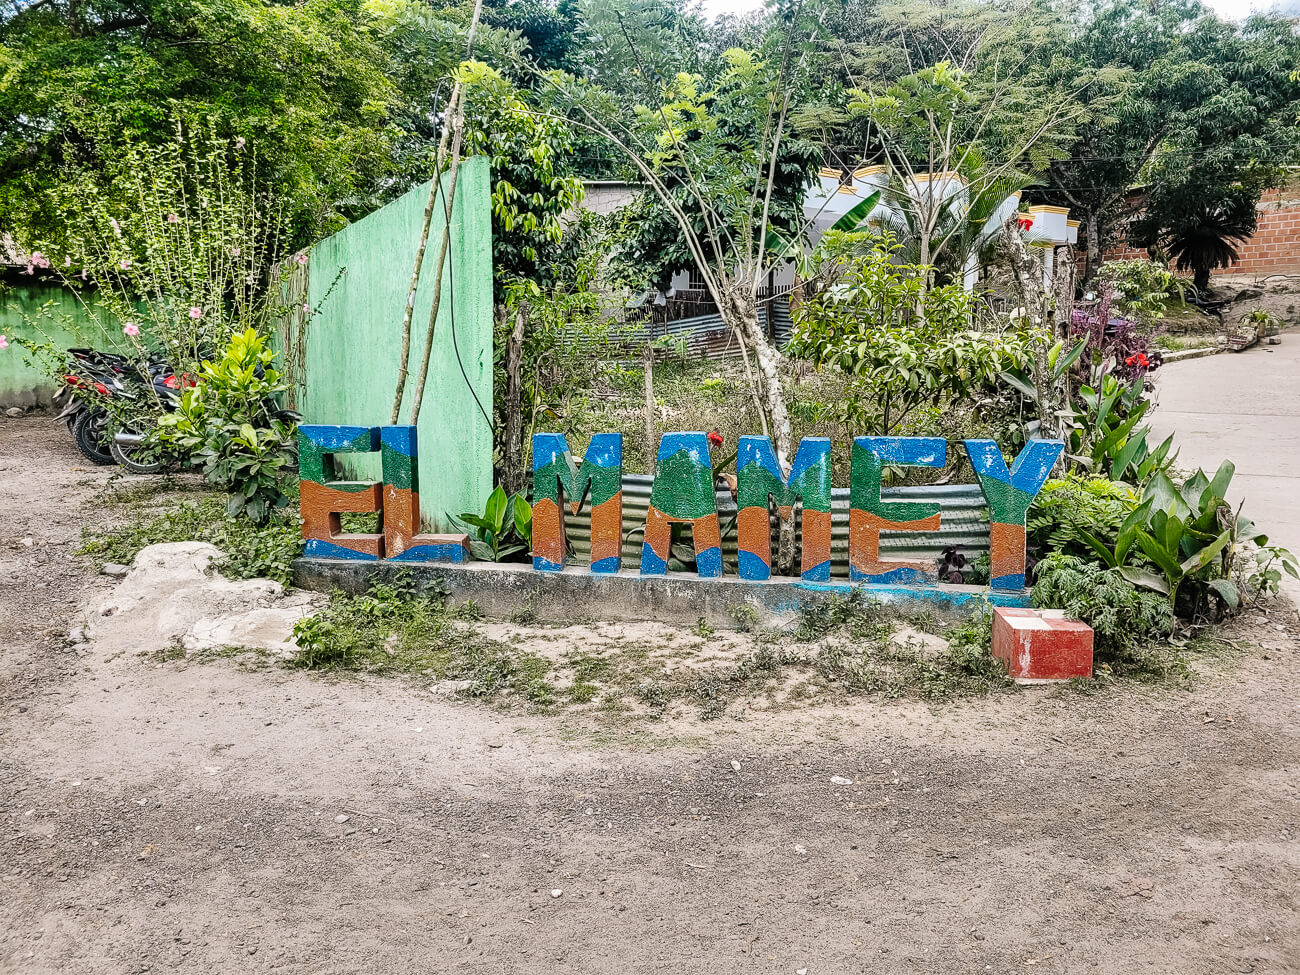 El Mamey, the starting point of the Lost City trek in Colombia